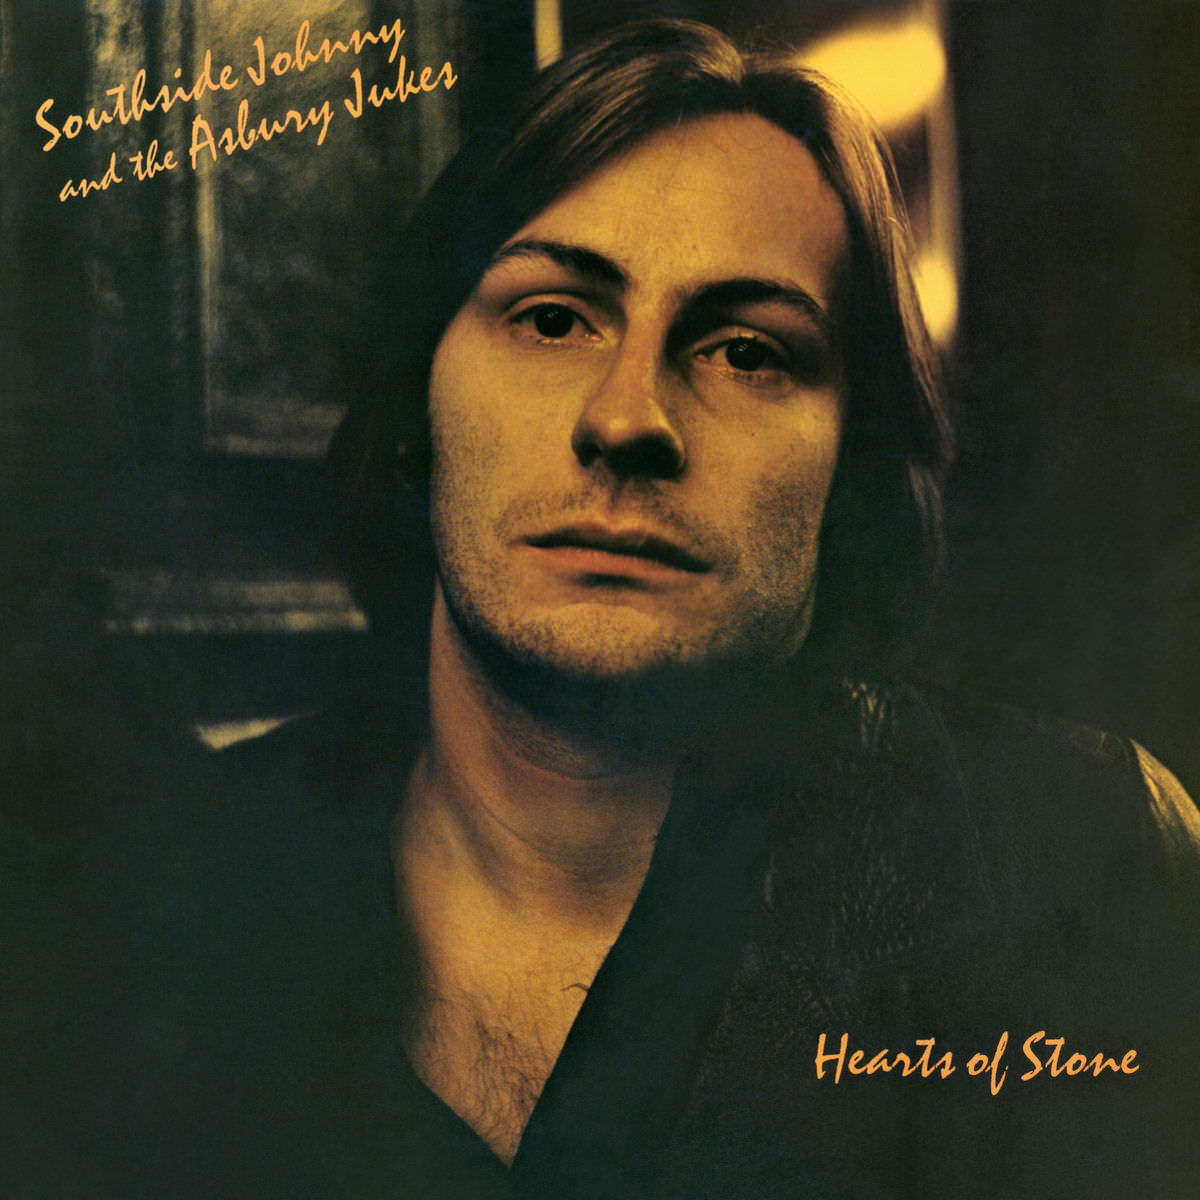 Southside Johnny and The Asbury Jukes – Hearts of Stone (Remastered) (1978/2017) [Qobuz FLAC 24bit/96kHz]